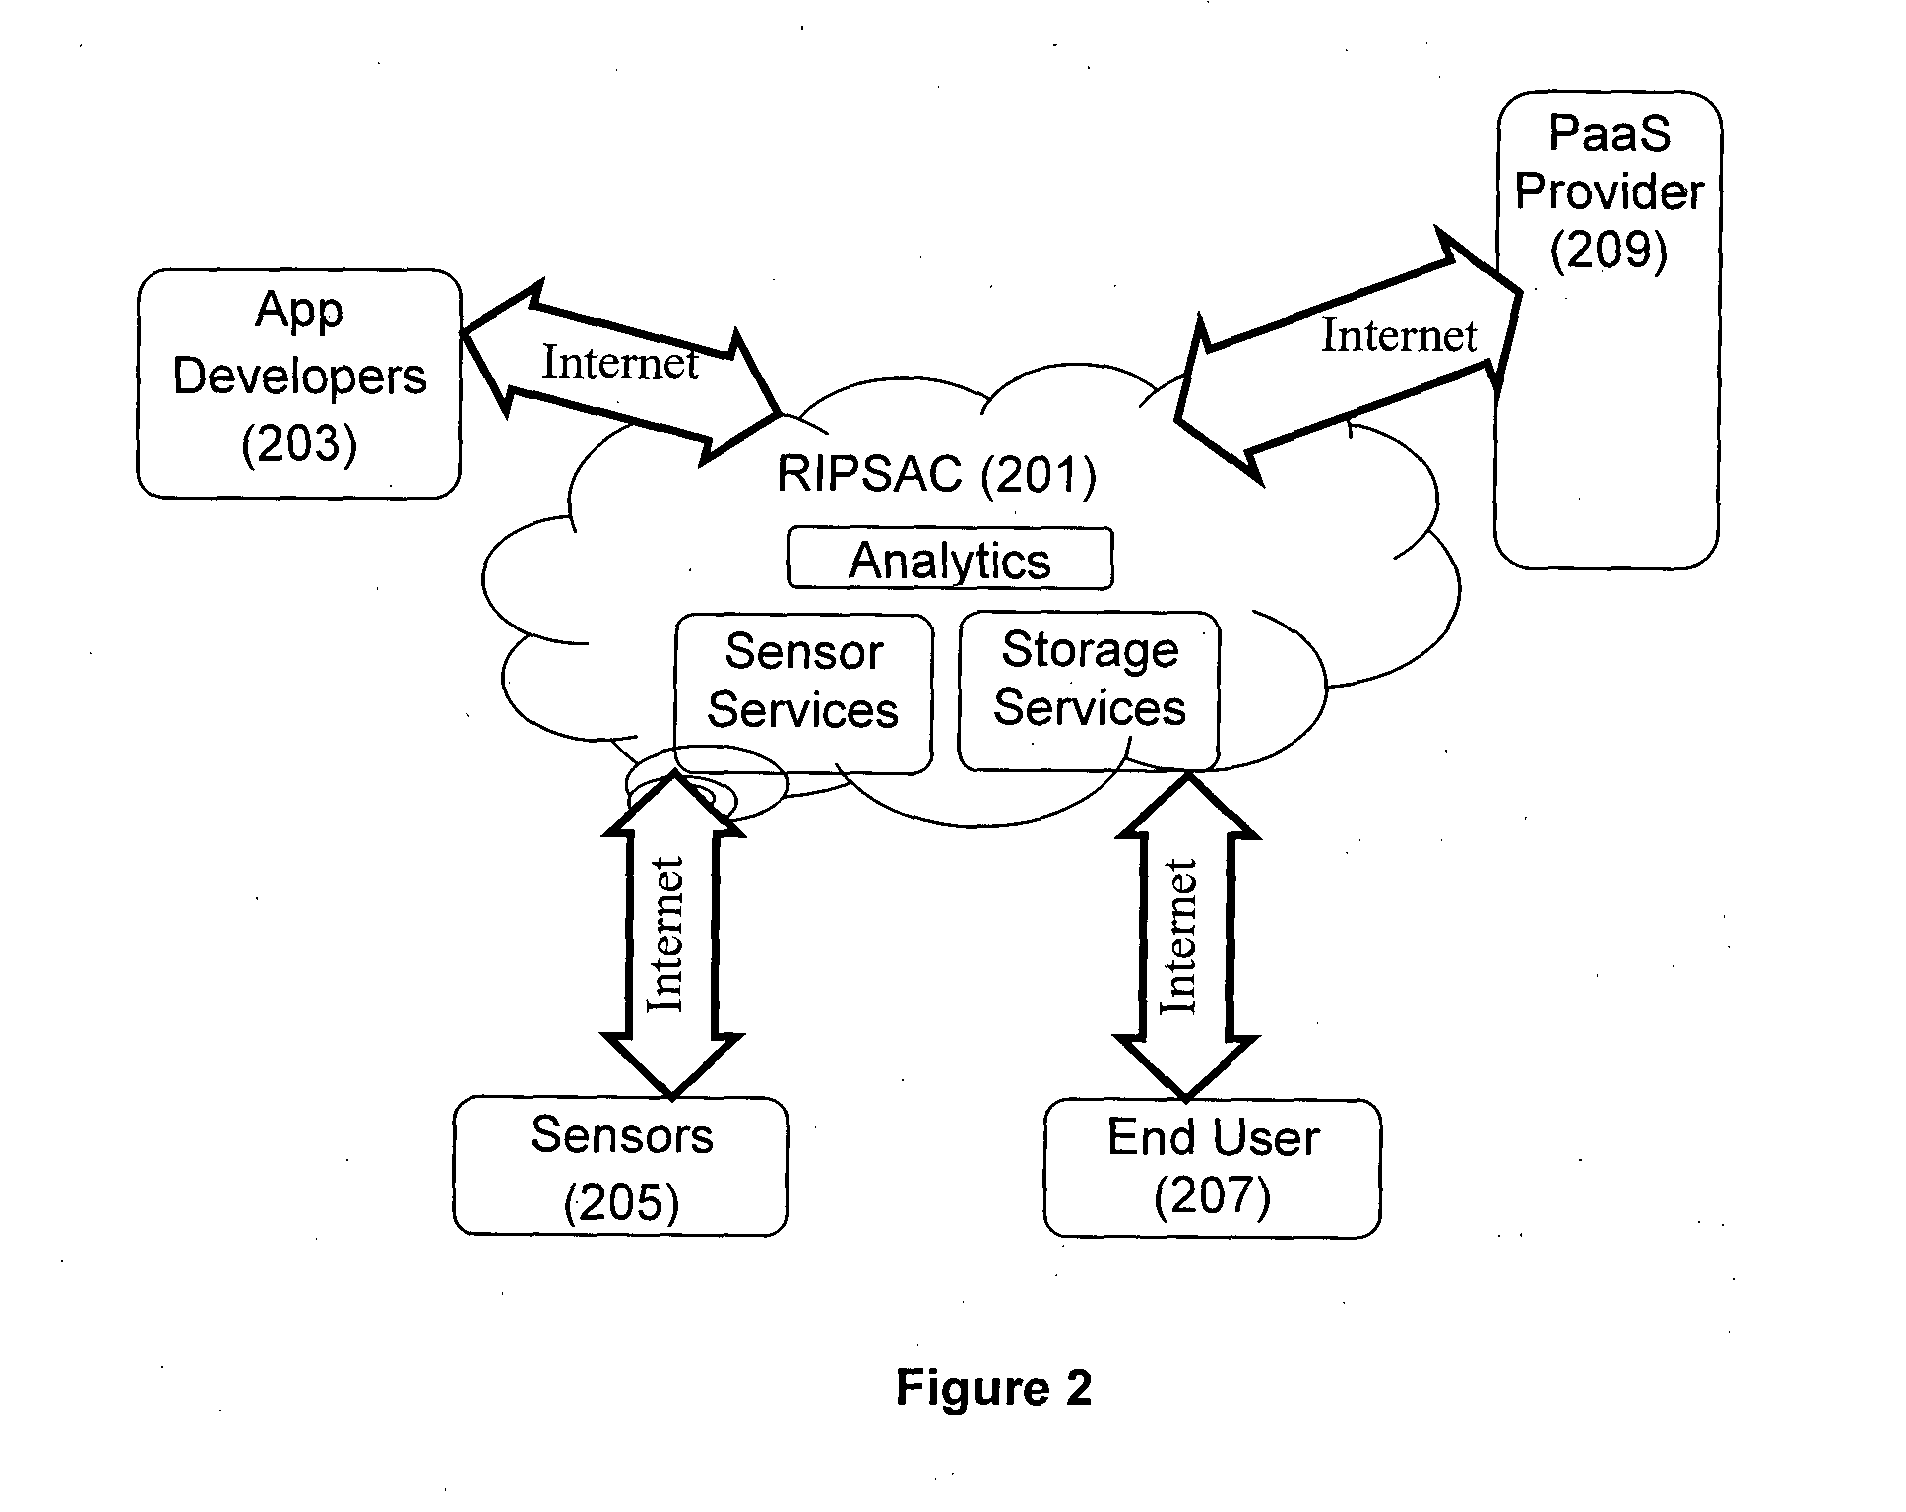 Computer Platform for Development and Deployment of Sensor Data Based Applications and Services